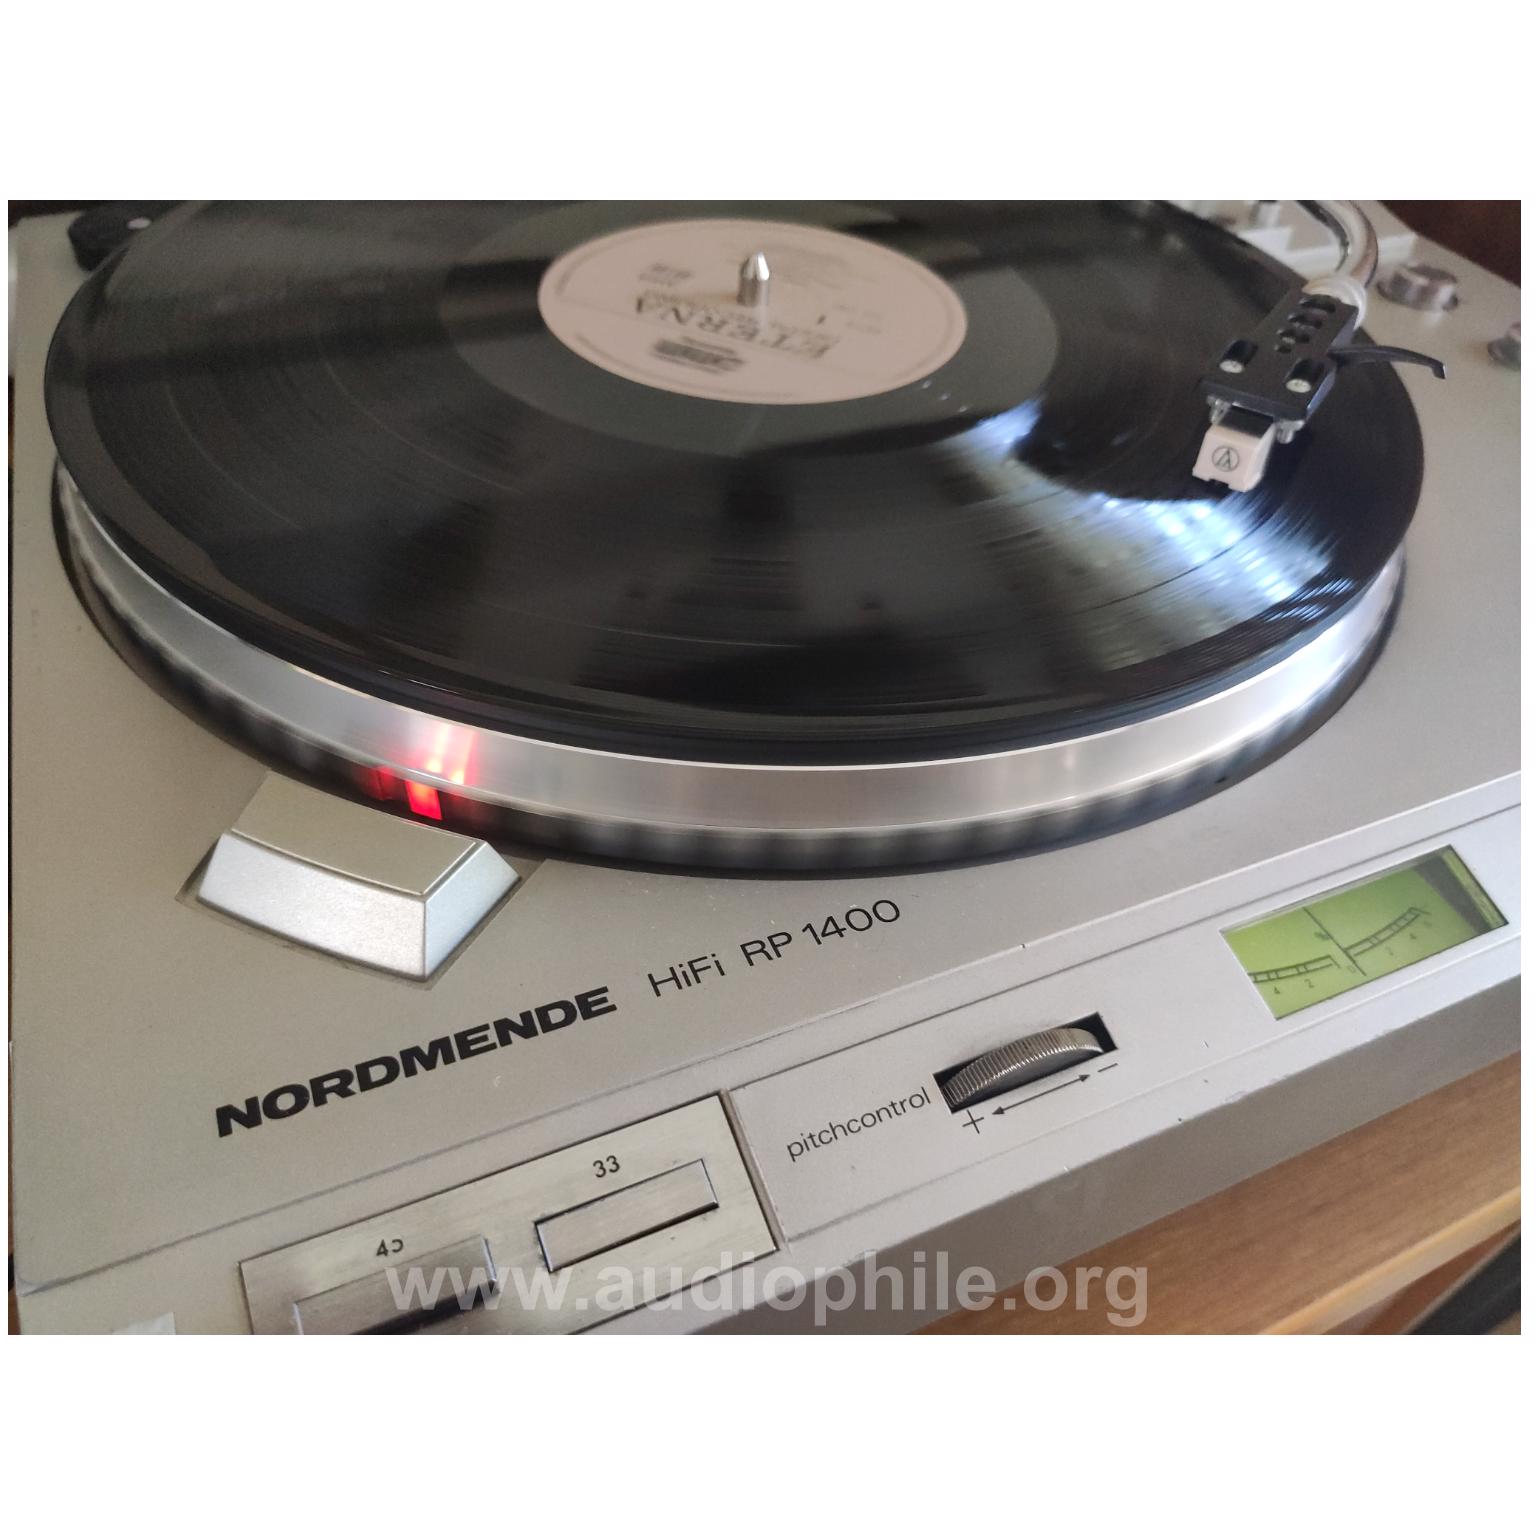 Nordmende rp 1400 direct drive